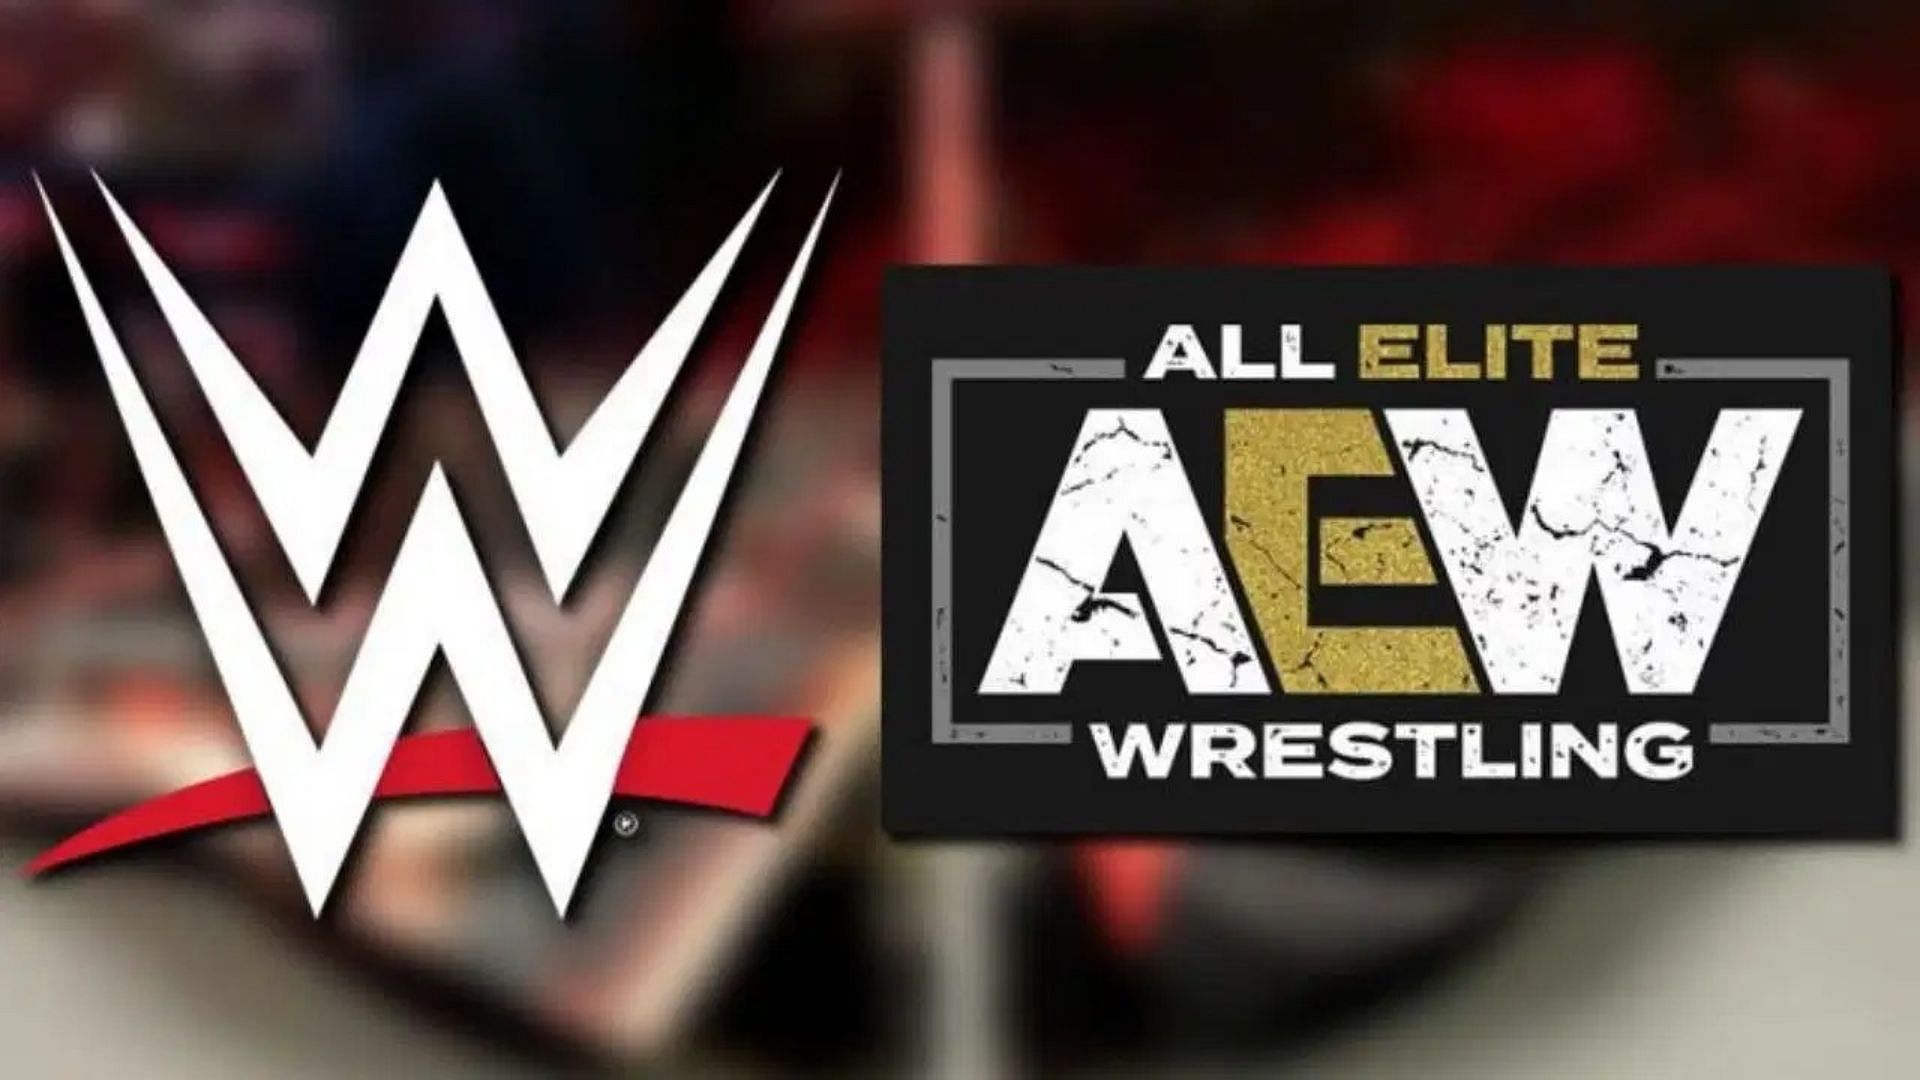 WWE and AEW are two of the top promotions in wrestling today